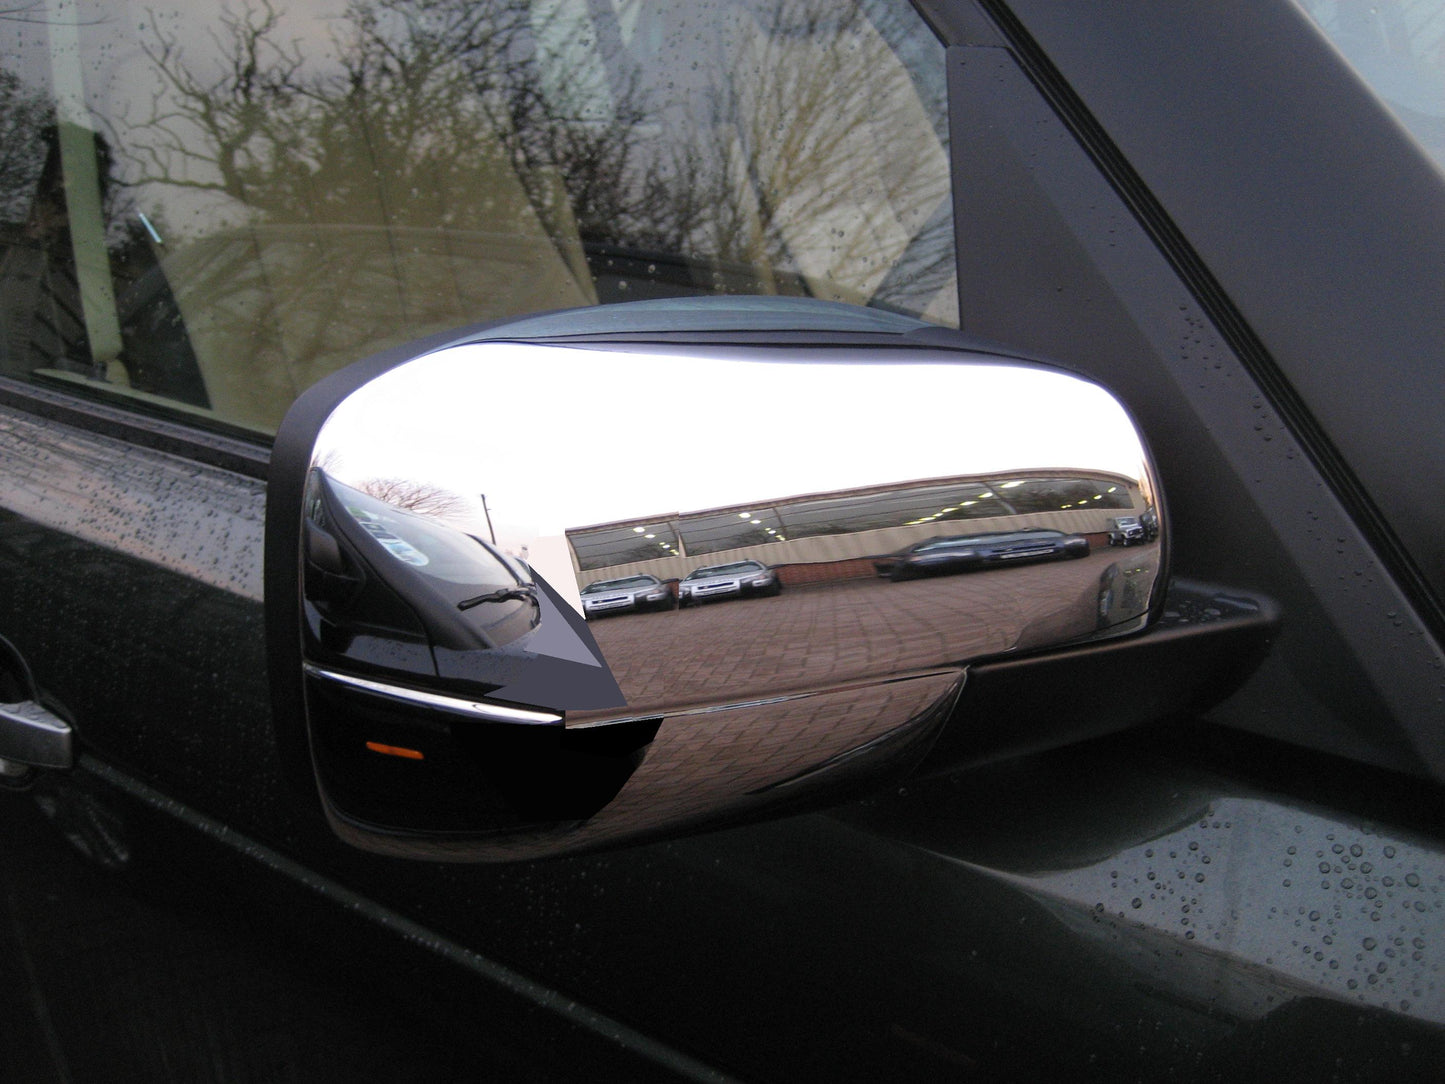 Full Mirror Covers for Land Rover Discovery 3 - Chrome